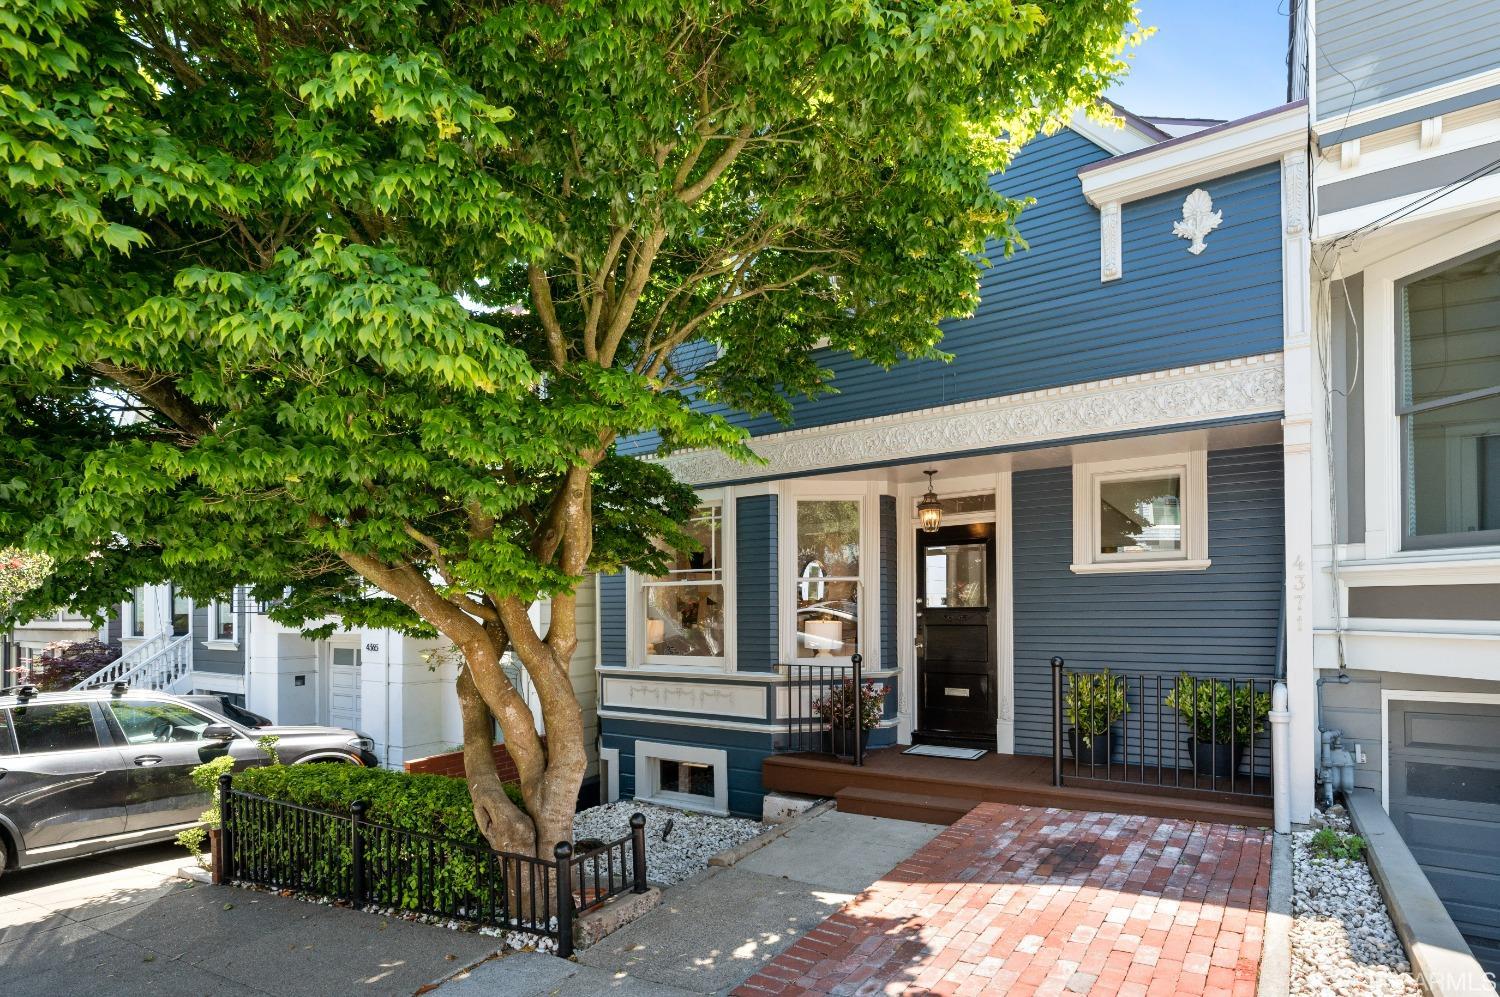 A timeless facade on a tree-lined street in the heart of Noe Valley!